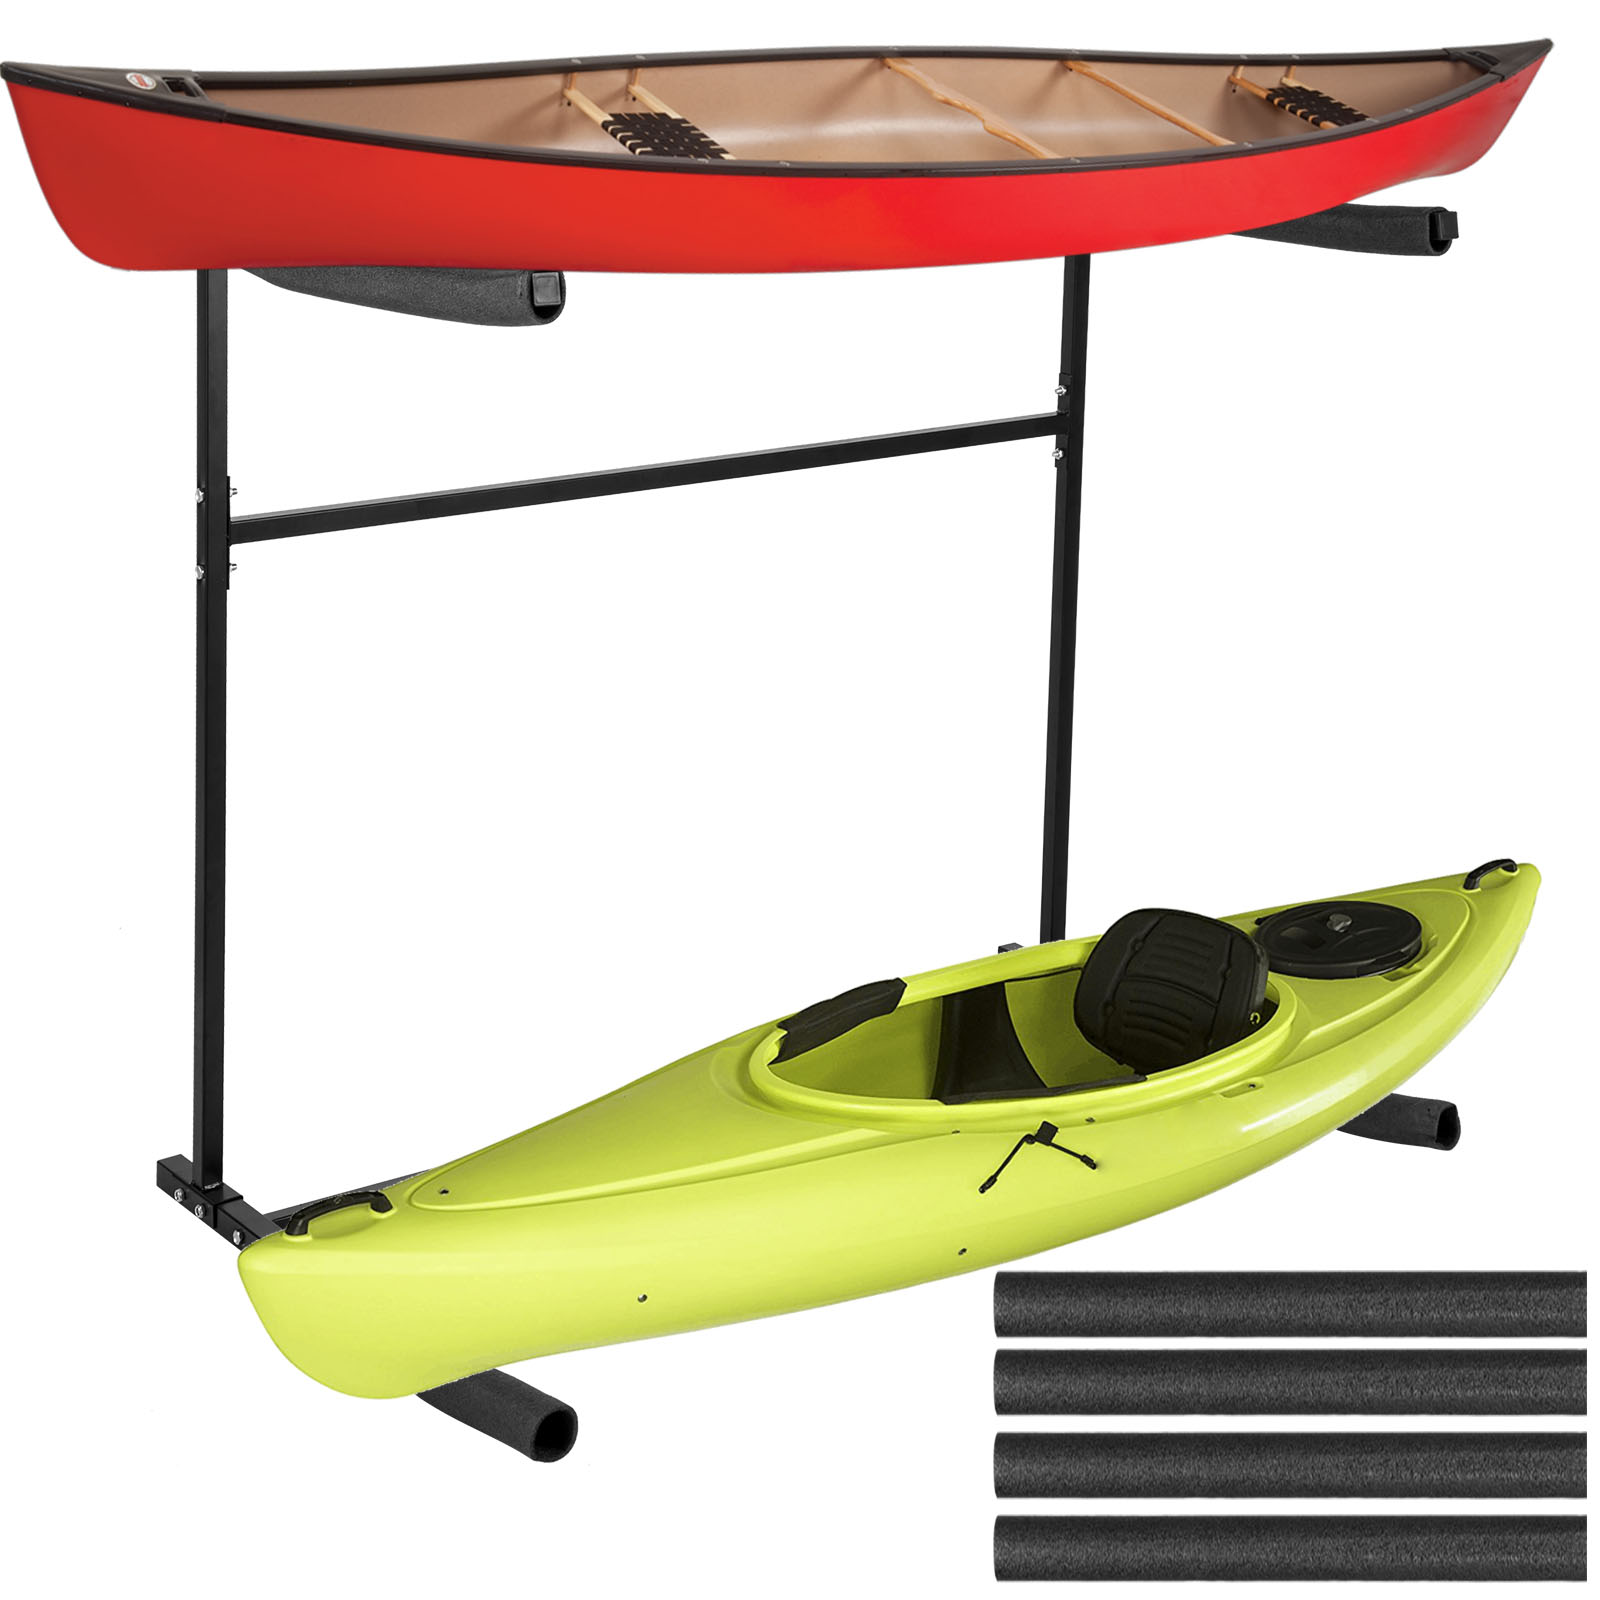 SUP Buy 1 Get 1 More,2 Levels Capacity 100 LBS Upper Layer and 120 LBS Bottom Layer VEVOR Freestanding Kayak Storage Rack for Two-Kayak Canoe & Paddleboard 